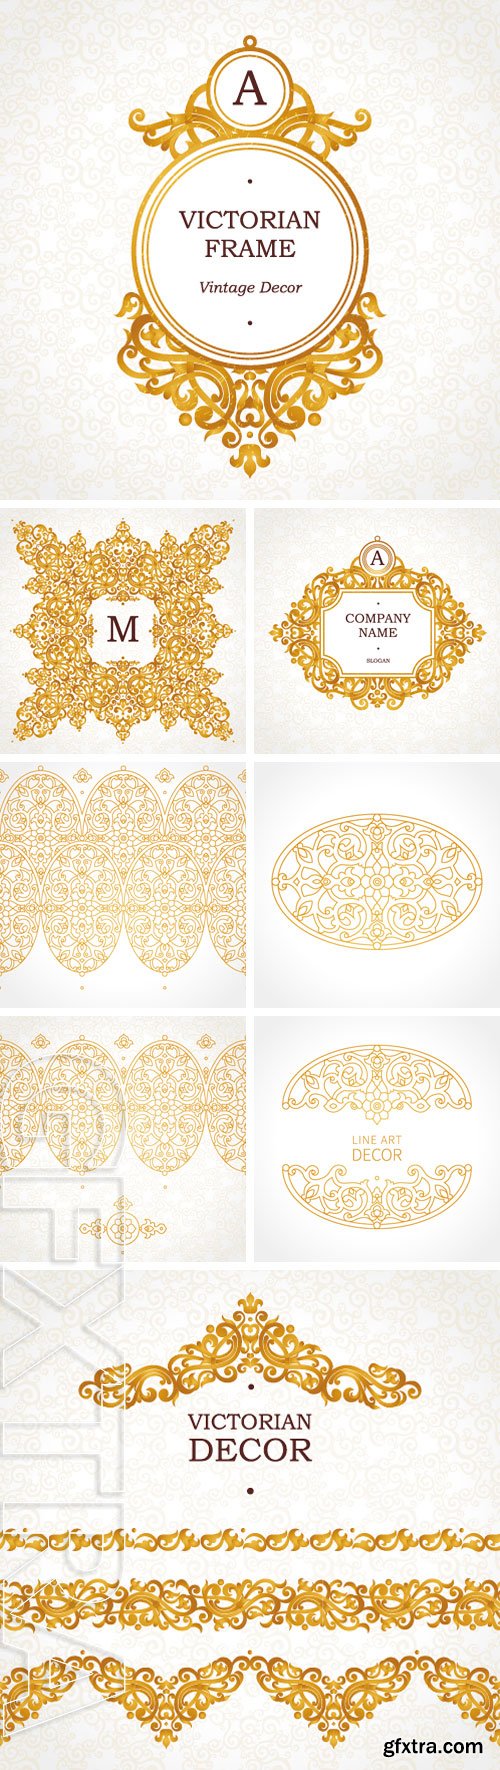 Stock Vectors - Vector ornate seamless borders in Victorian style. Element for design, place for text. Traditional golden decor